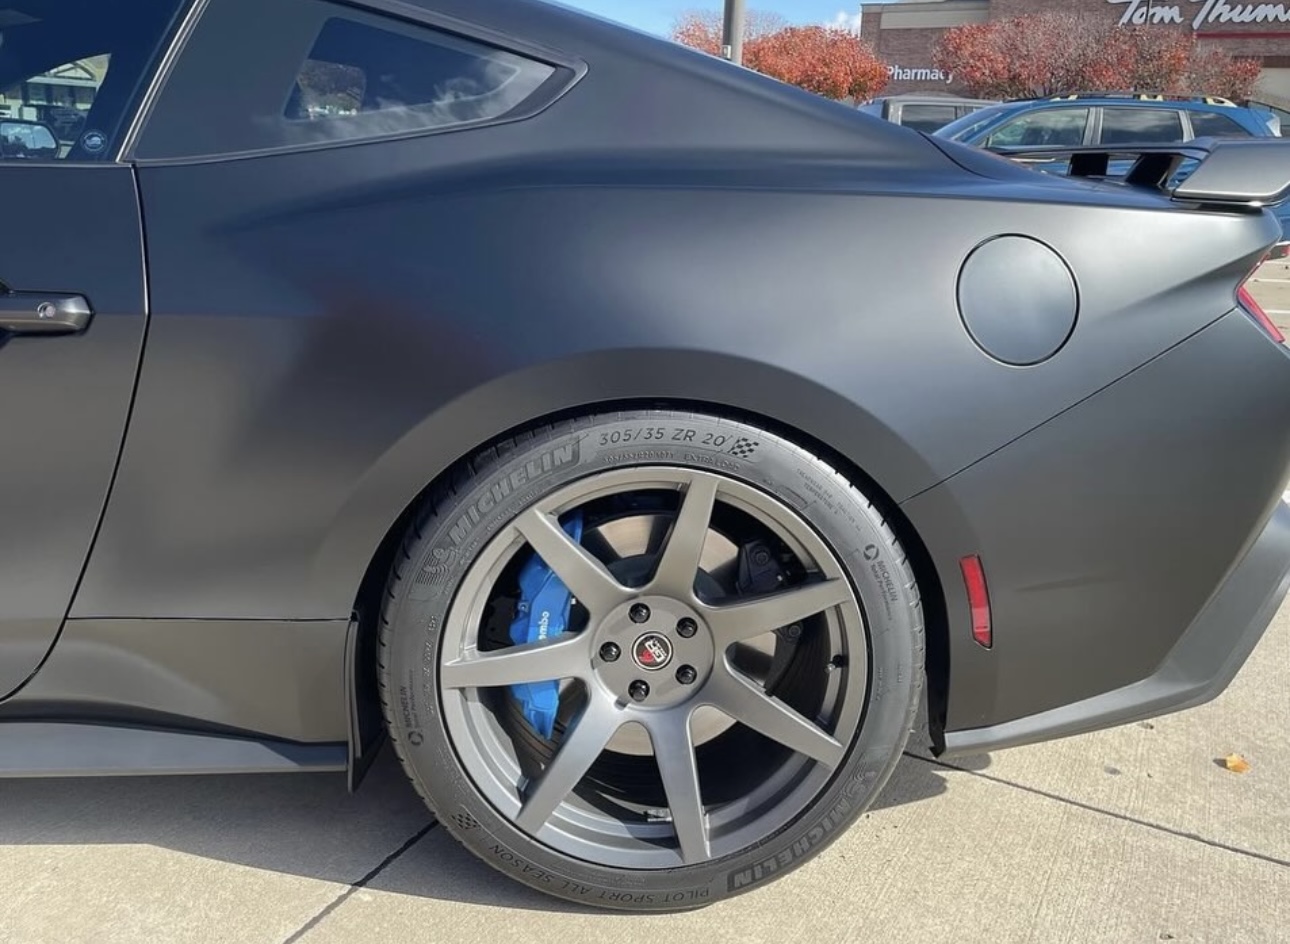 S650 Mustang Official S650 Dark Horse Aftermarket Wheel/Tire Thread! IMG_3104